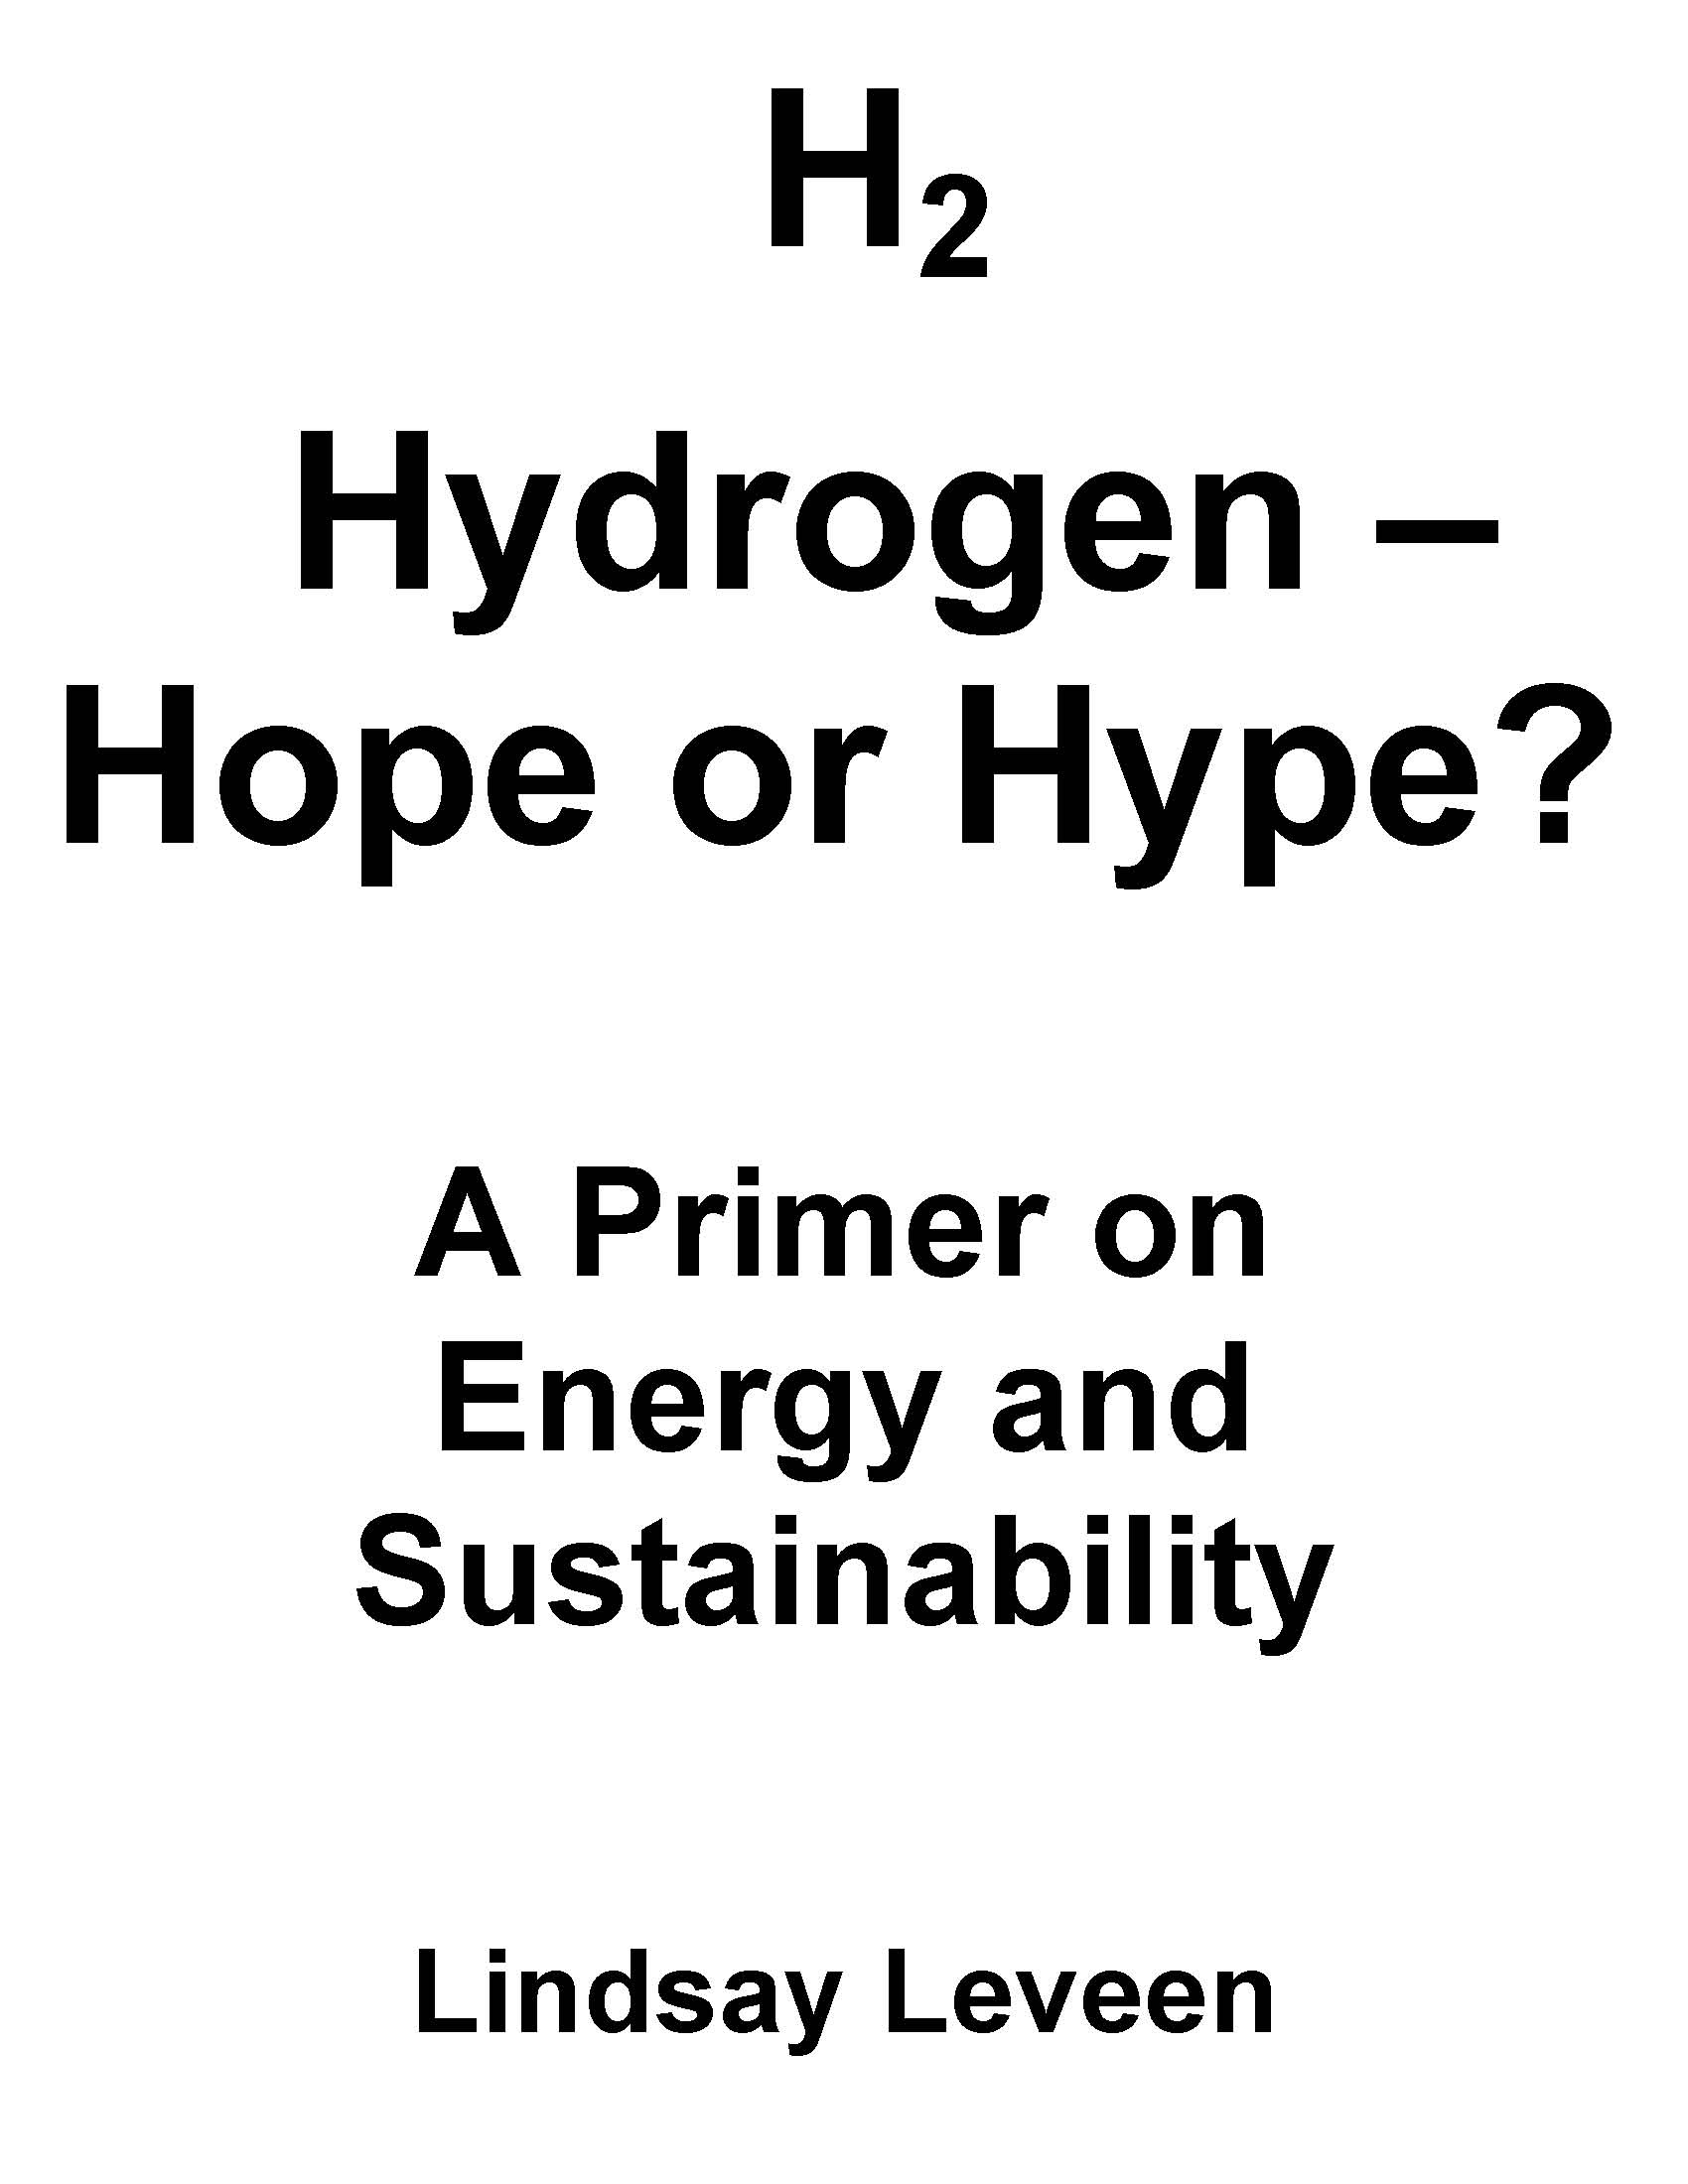 Hydrogen - Hope or Hype? A Primer on Energy and Sustainability